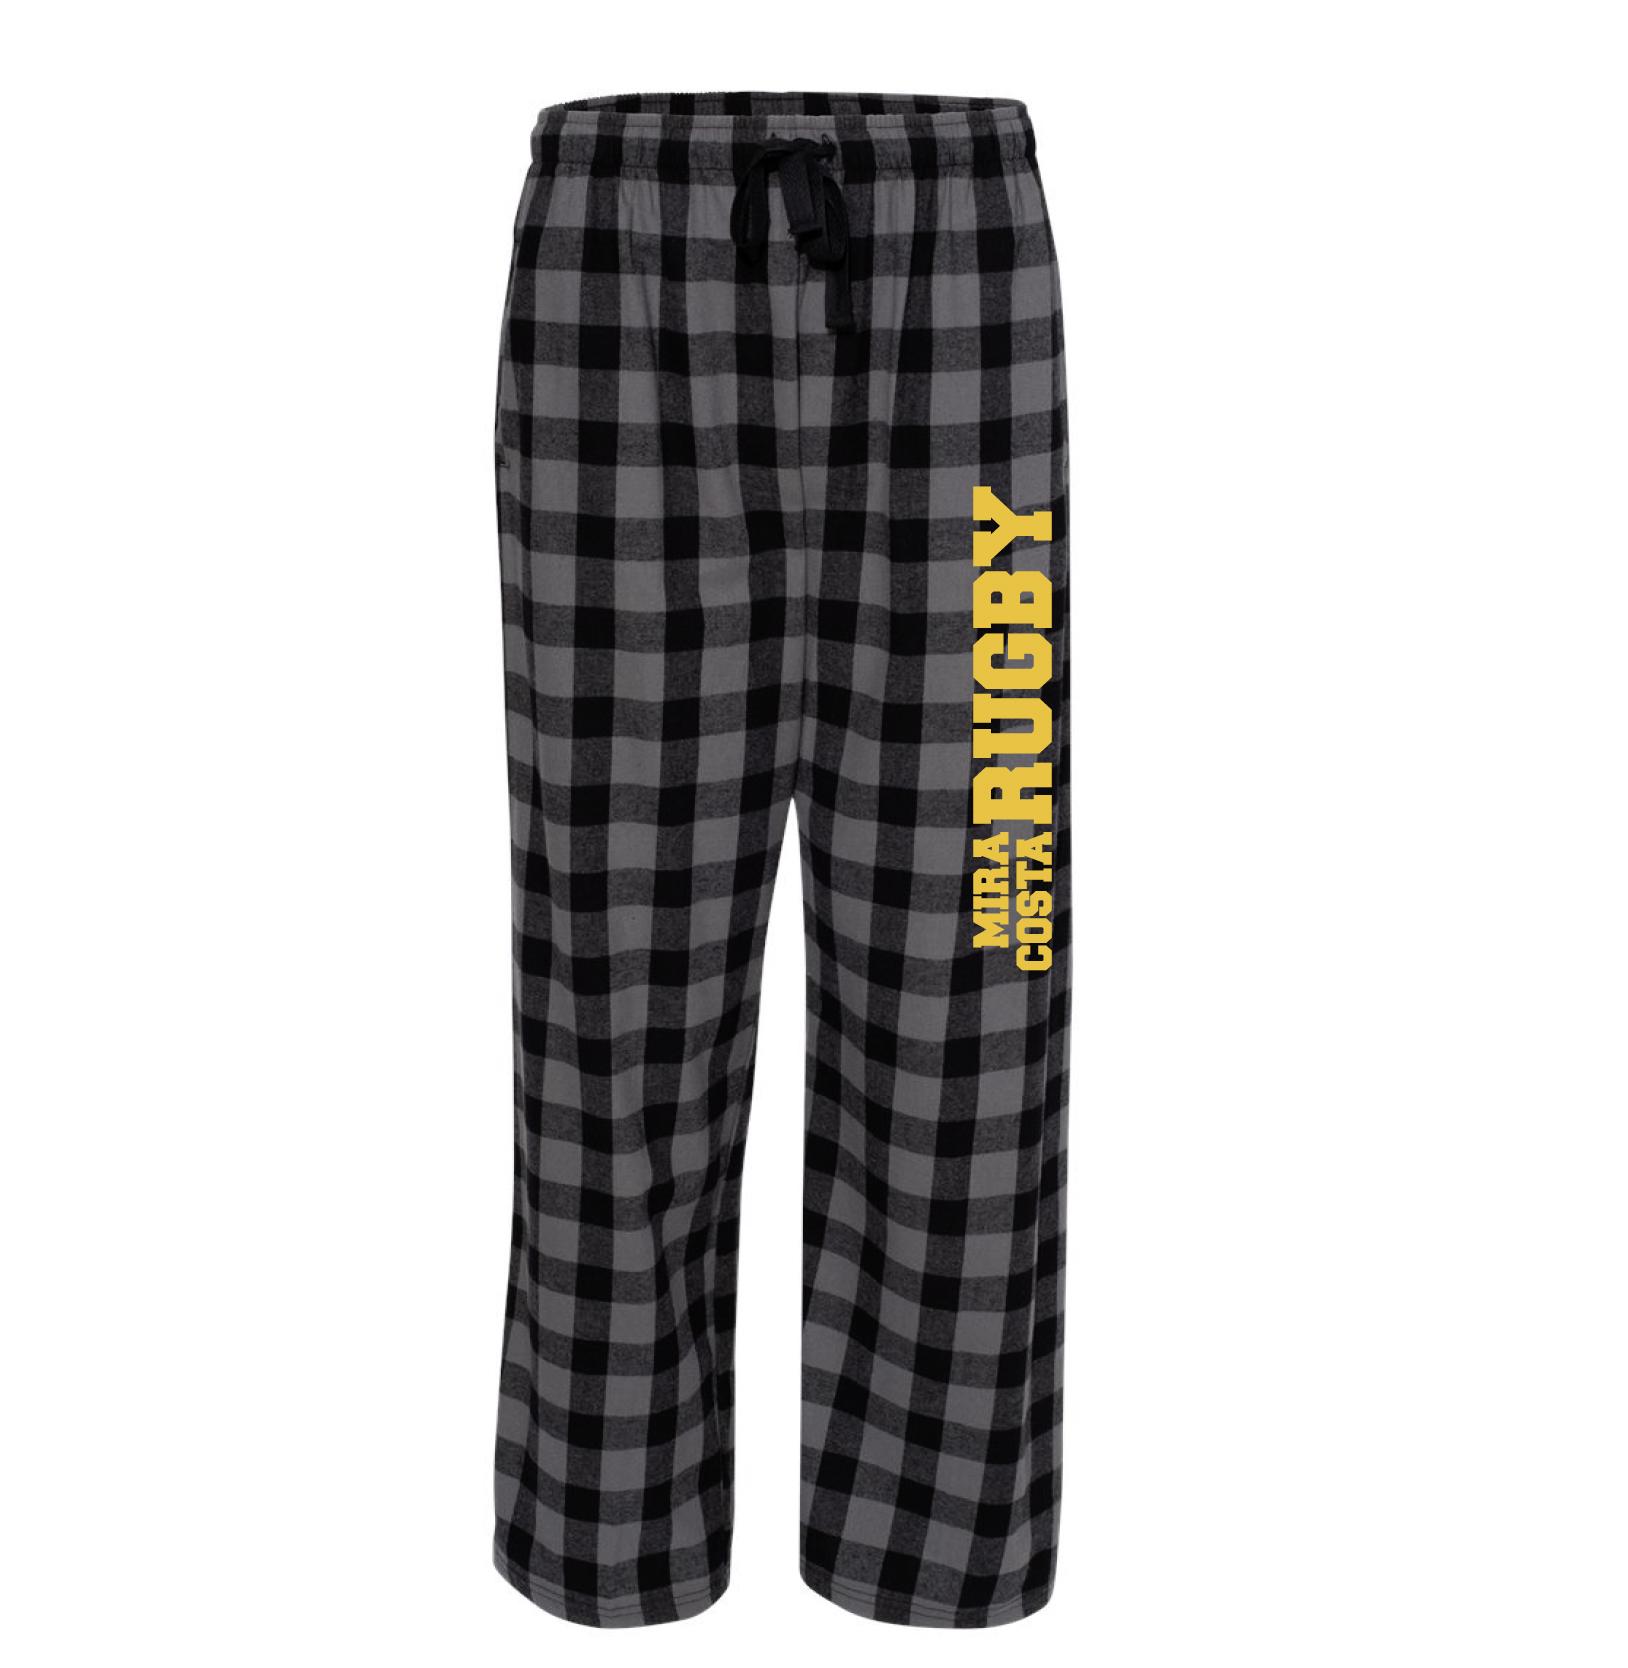 https://costarugby.com/wp-content/uploads/2023/01/FlannelPants.png